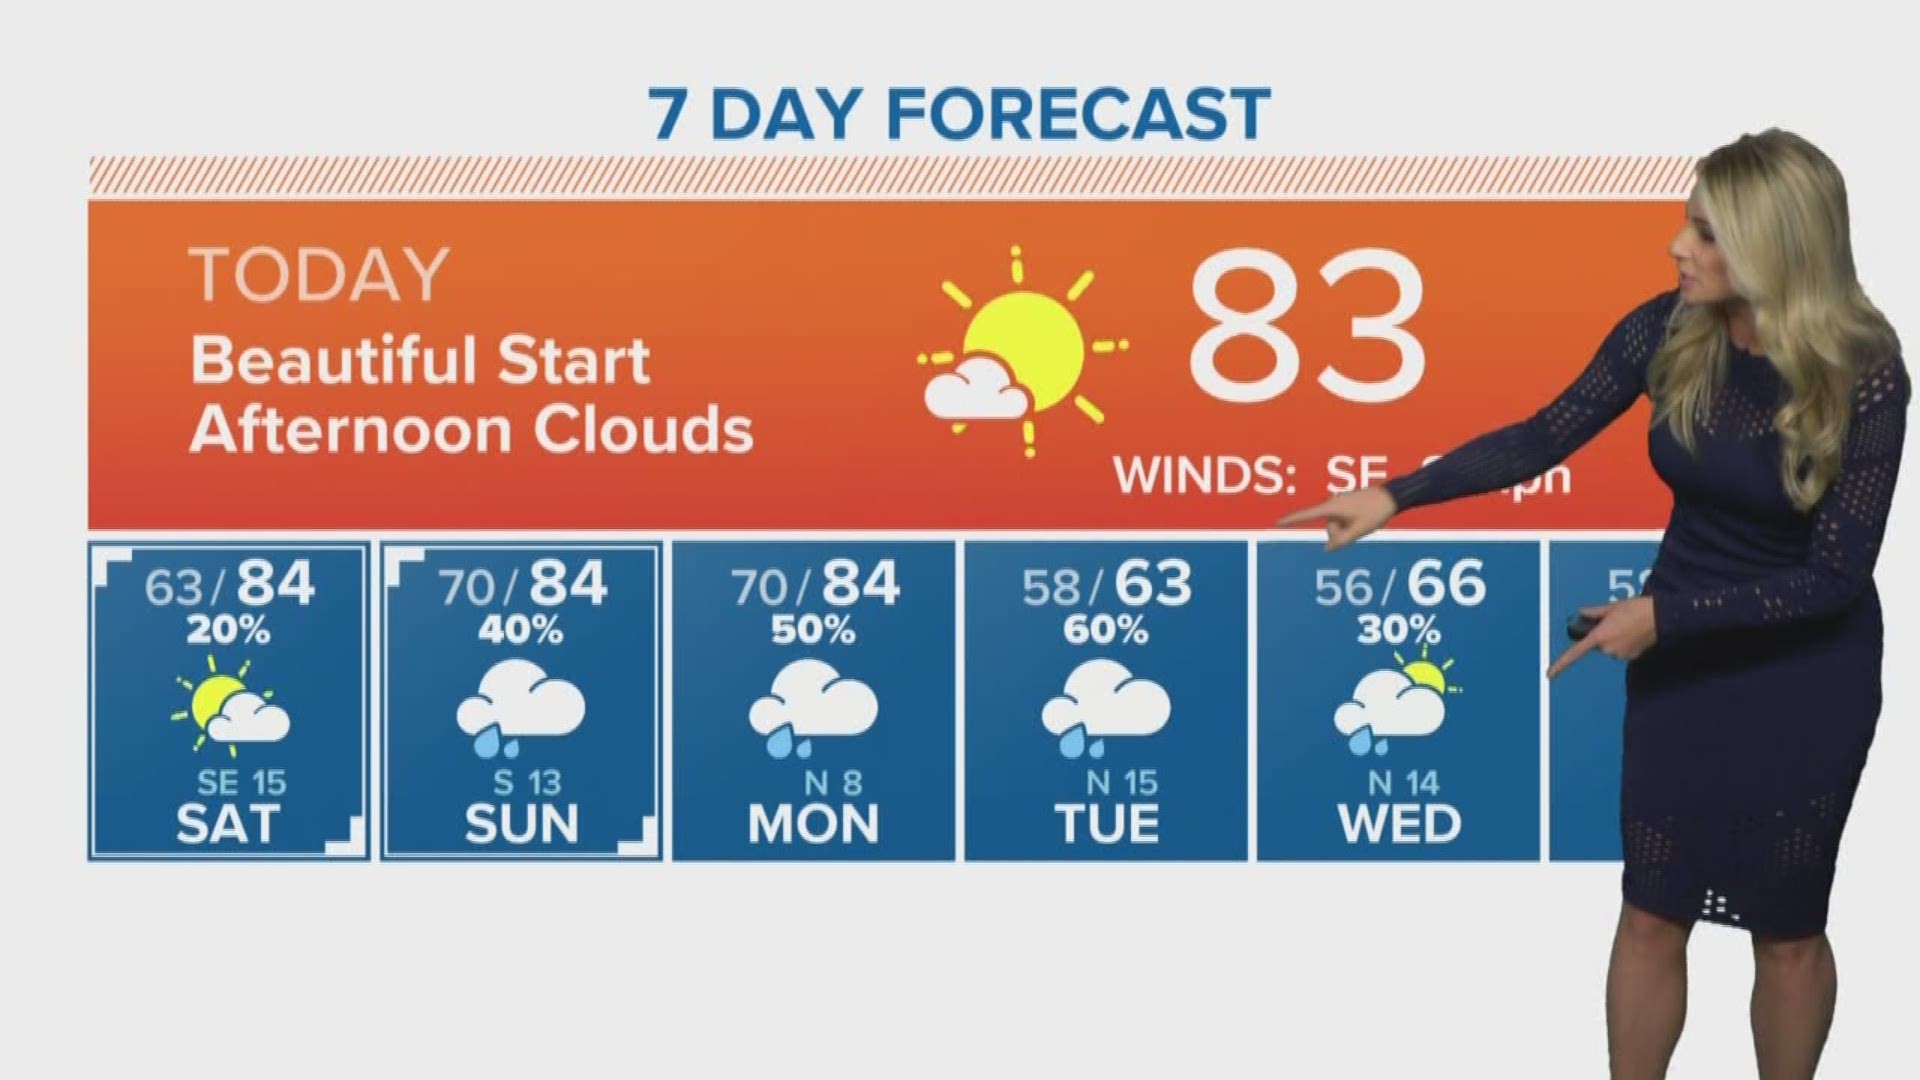 KHOU 11 Meteorologist Chita Craft says we will start the weekend with beautiful weather with highs in the low 80s.